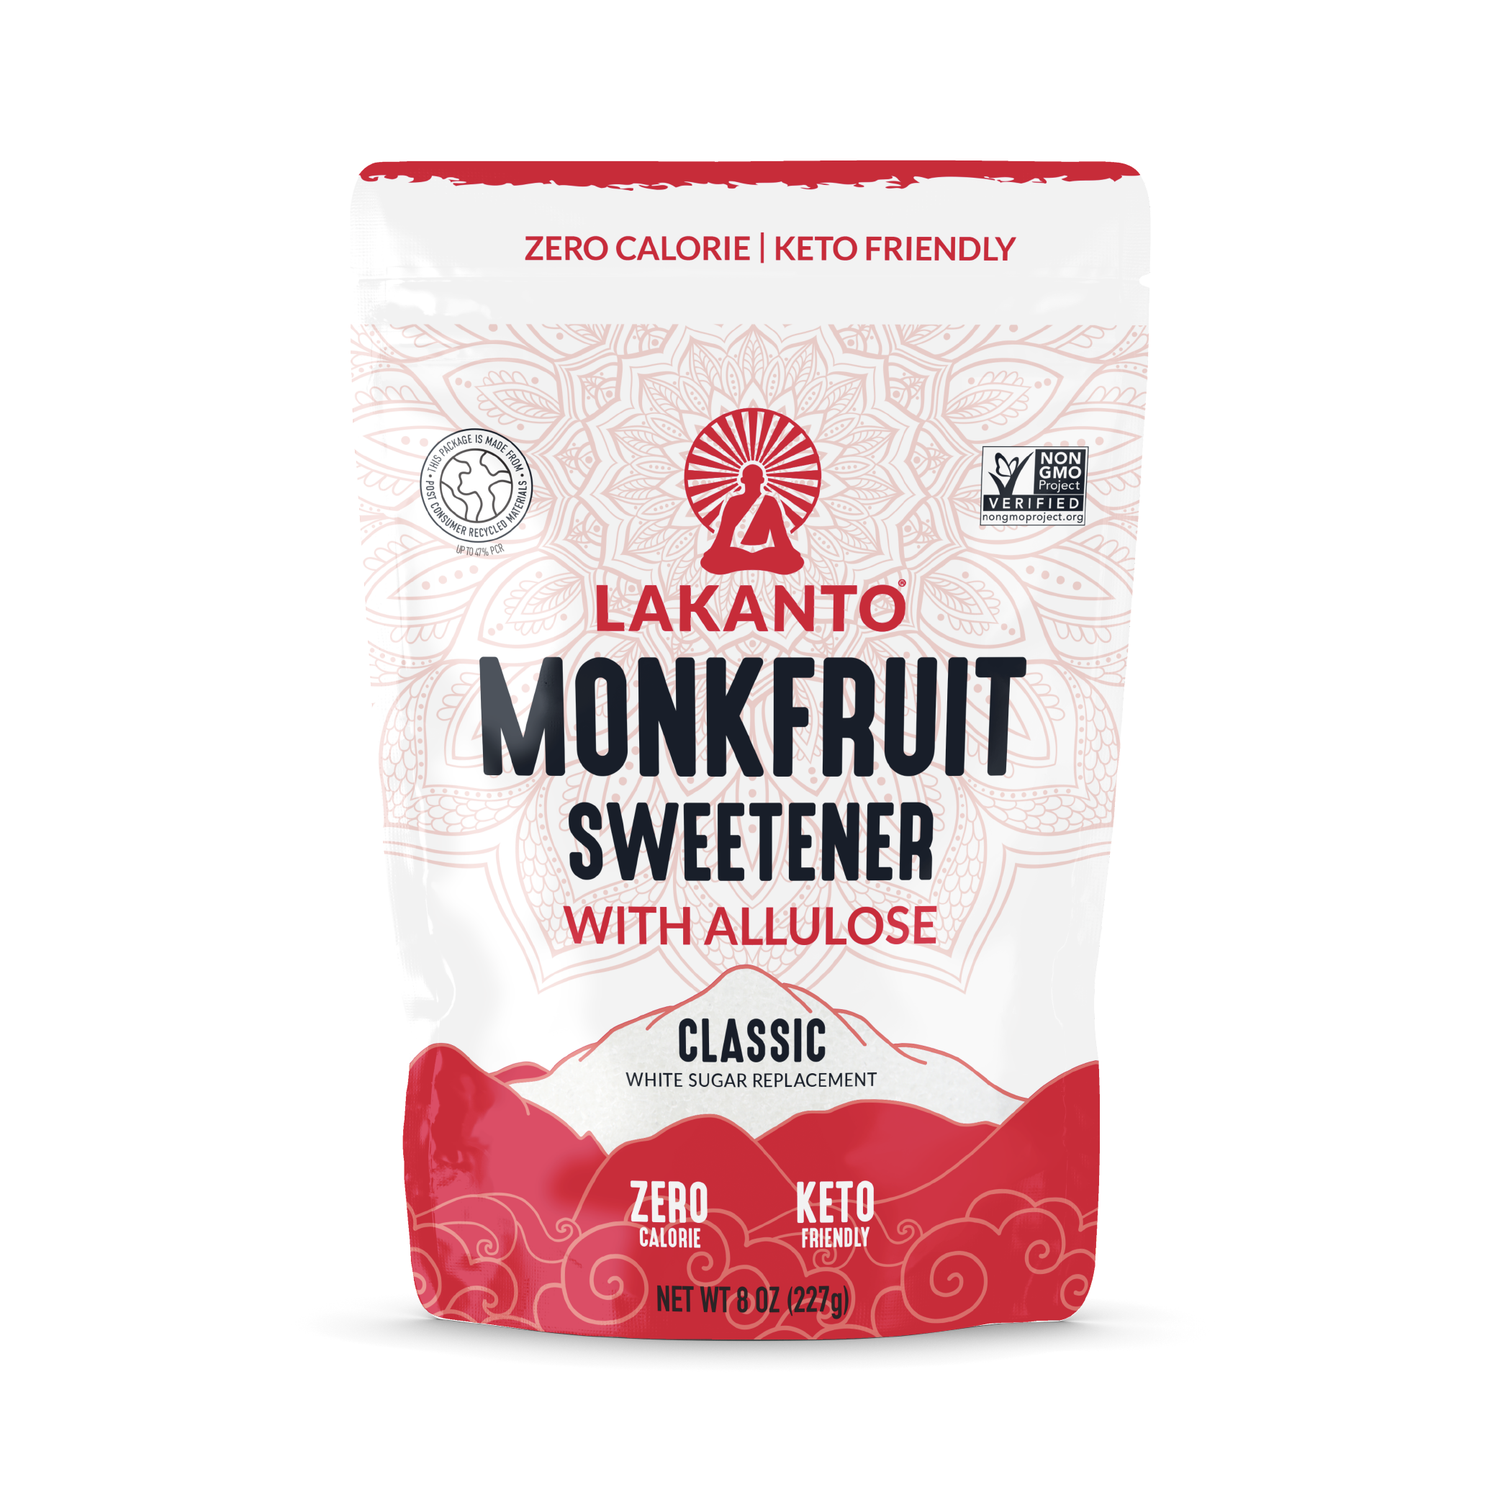 Classic Monkfruit Sweetener with Allulose - White Sugar Replacement 1 lb